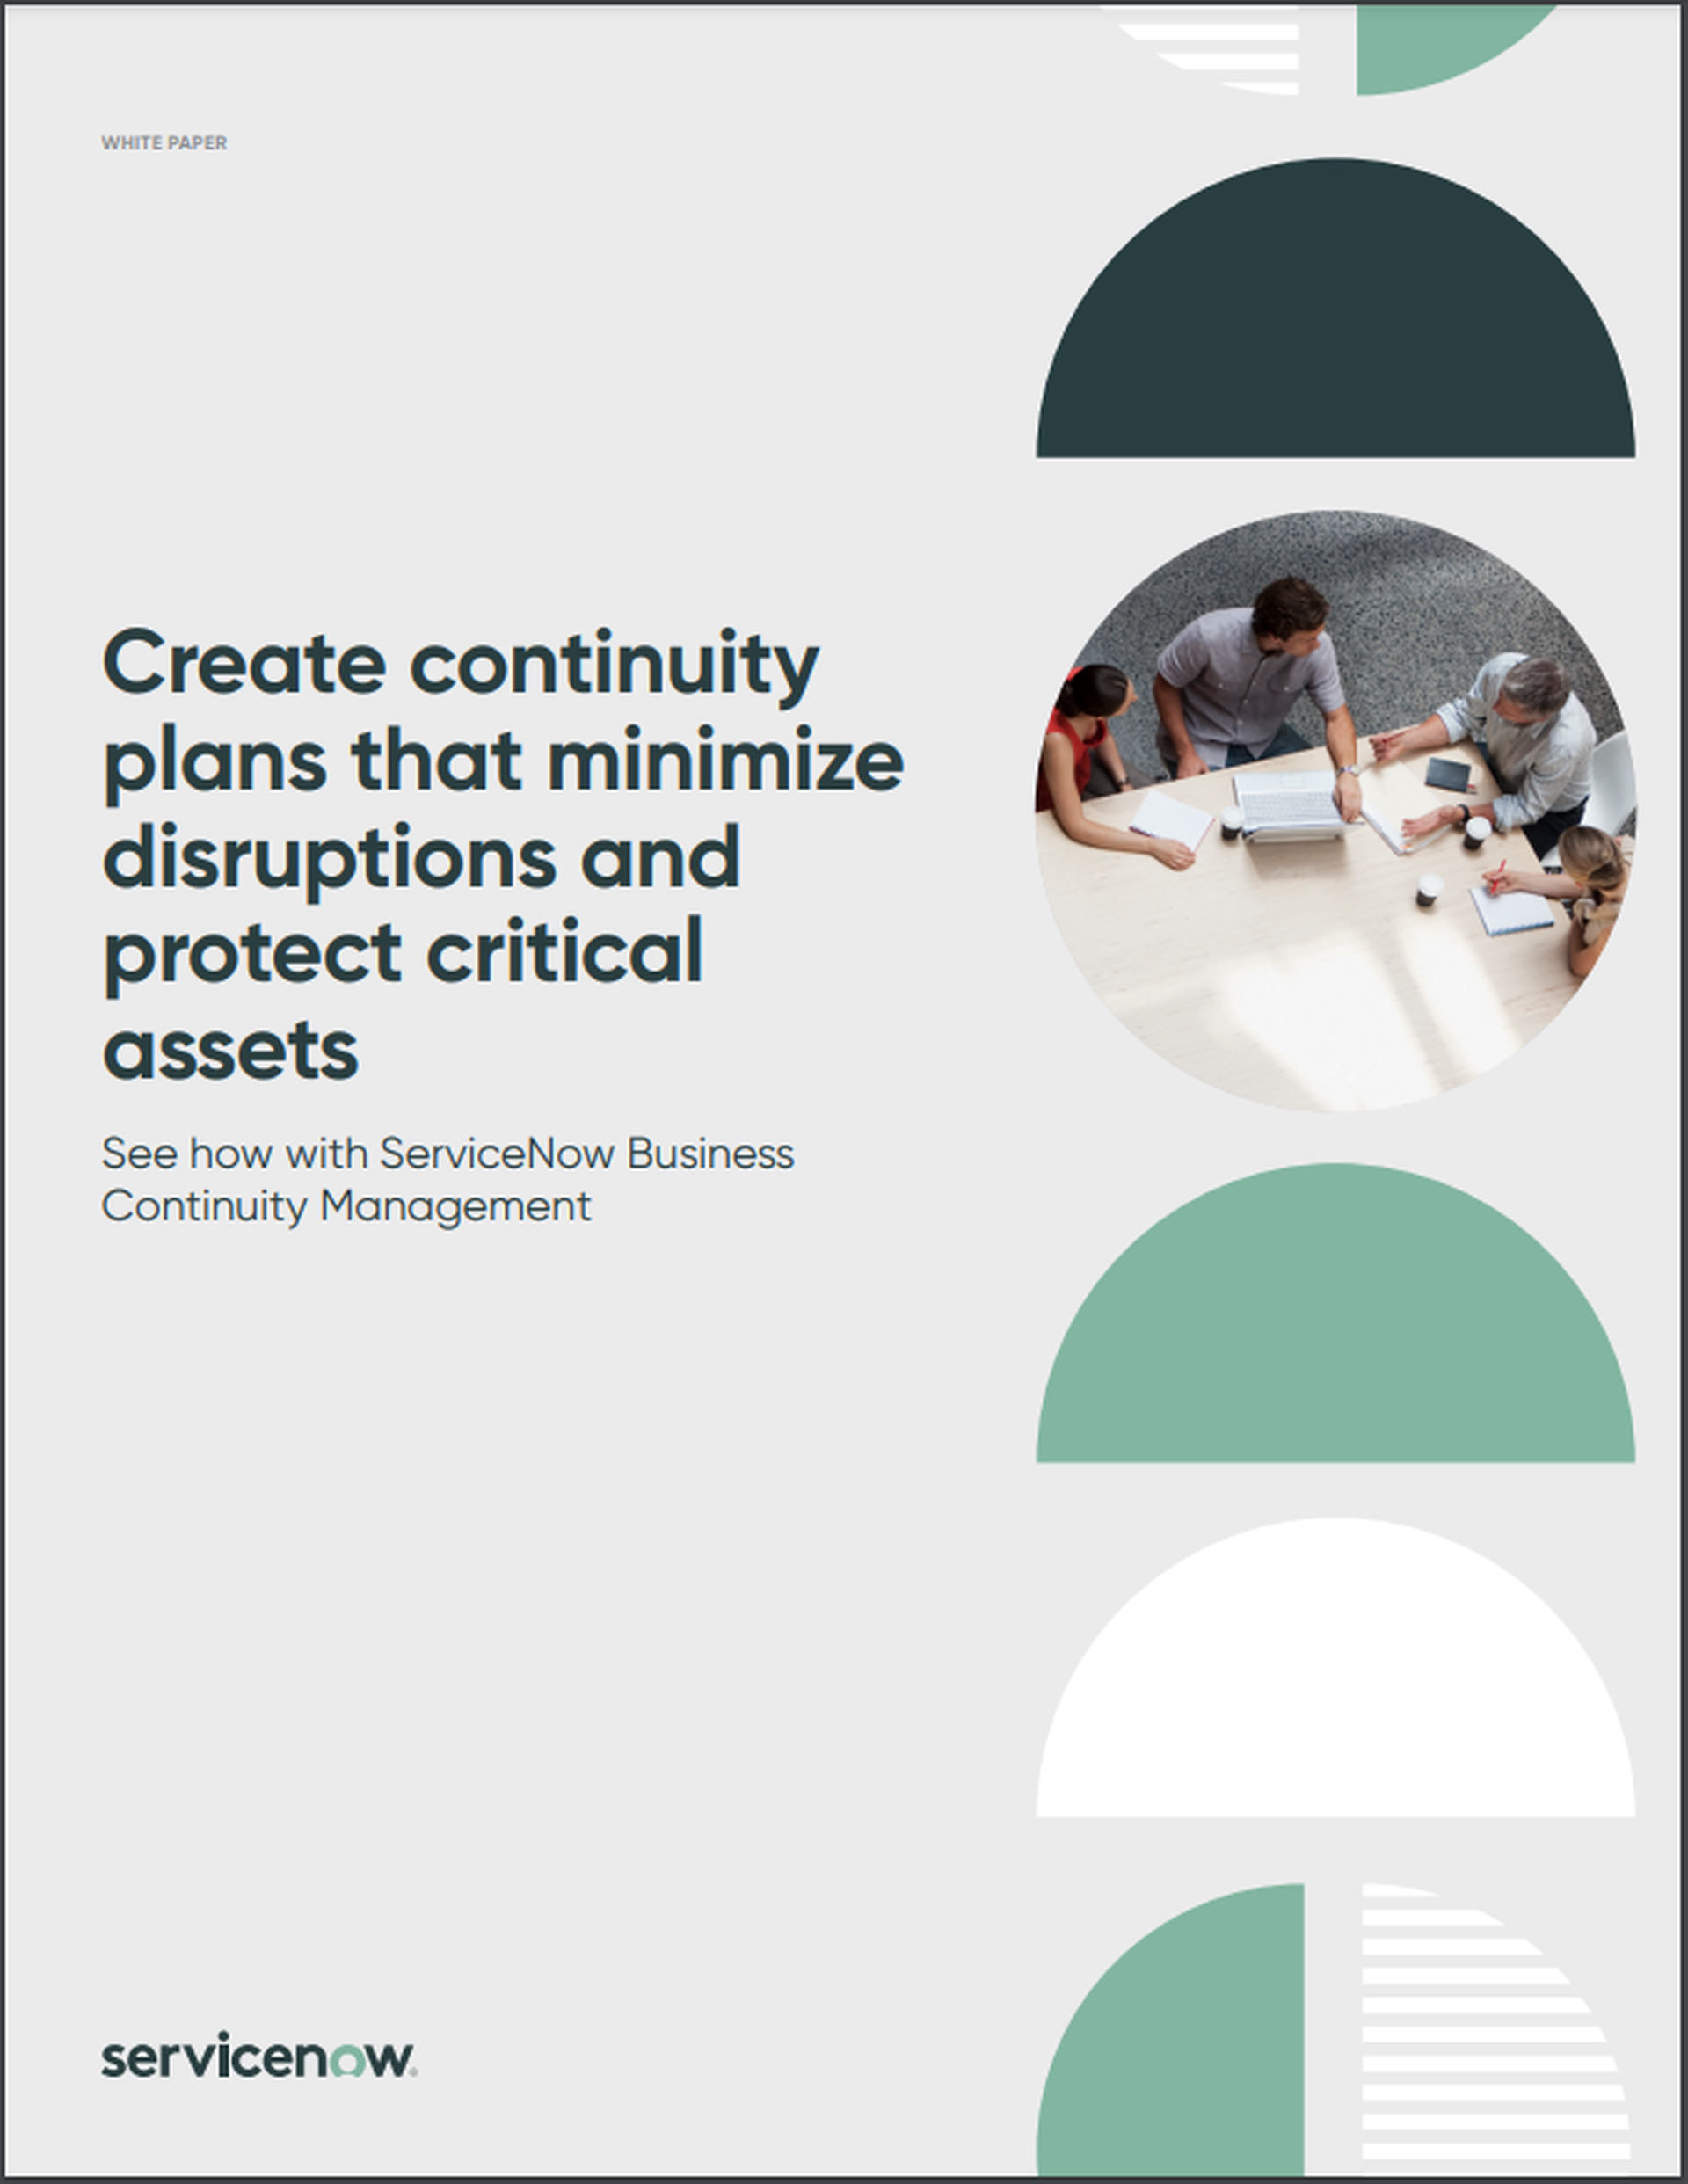 Create continuity plans that minimize disruptions and protect critical assets